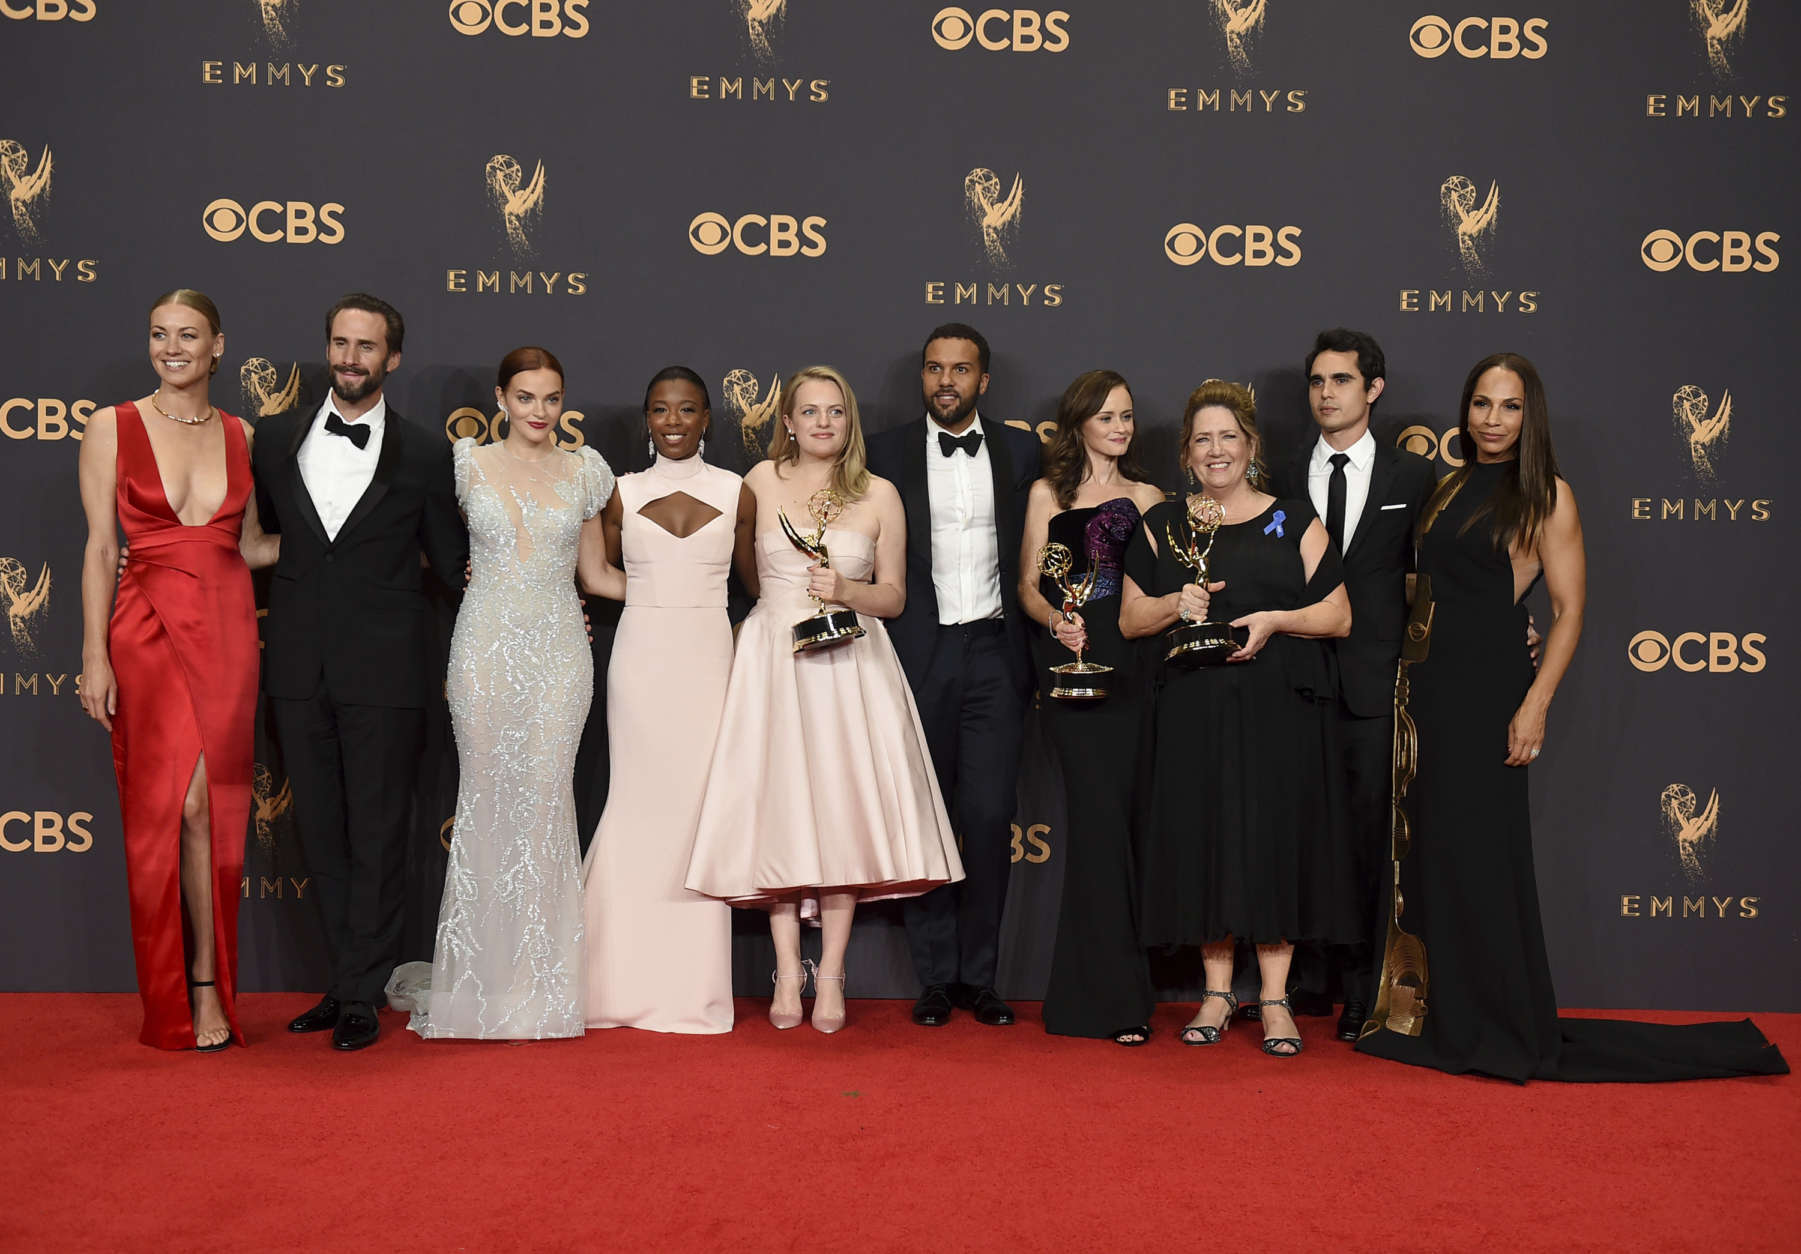 Yvonne Strahovski, from left, Joesph Fiennes, Madeline Brewer, Samira Wiley, Elisabeth Moss, O-T Fagbenle, Alexis Bledel, Ann Dowd, Max Minghella, and Amanda Brugel pose in the press room with their award for for outstanding drama series for "The Handmaid's Tale" at the 69th Primetime Emmy Awards on Sunday, Sept. 17, 2017, at the Microsoft Theater in Los Angeles. (Photo by Jordan Strauss/Invision/AP)